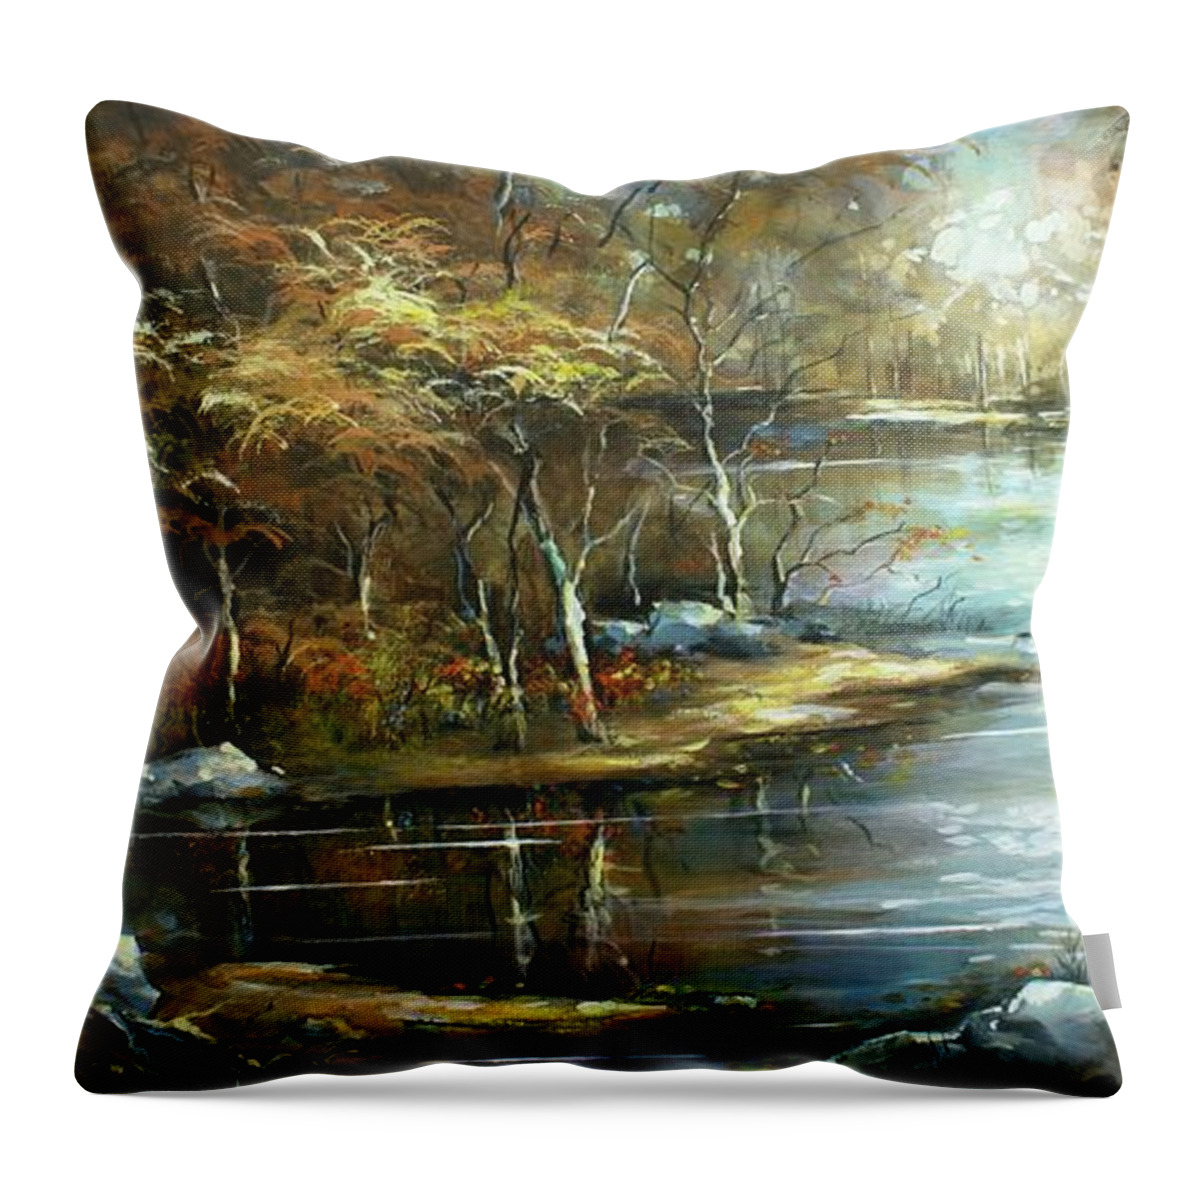 Landscape Throw Pillow featuring the painting Landscape by Michael Lang